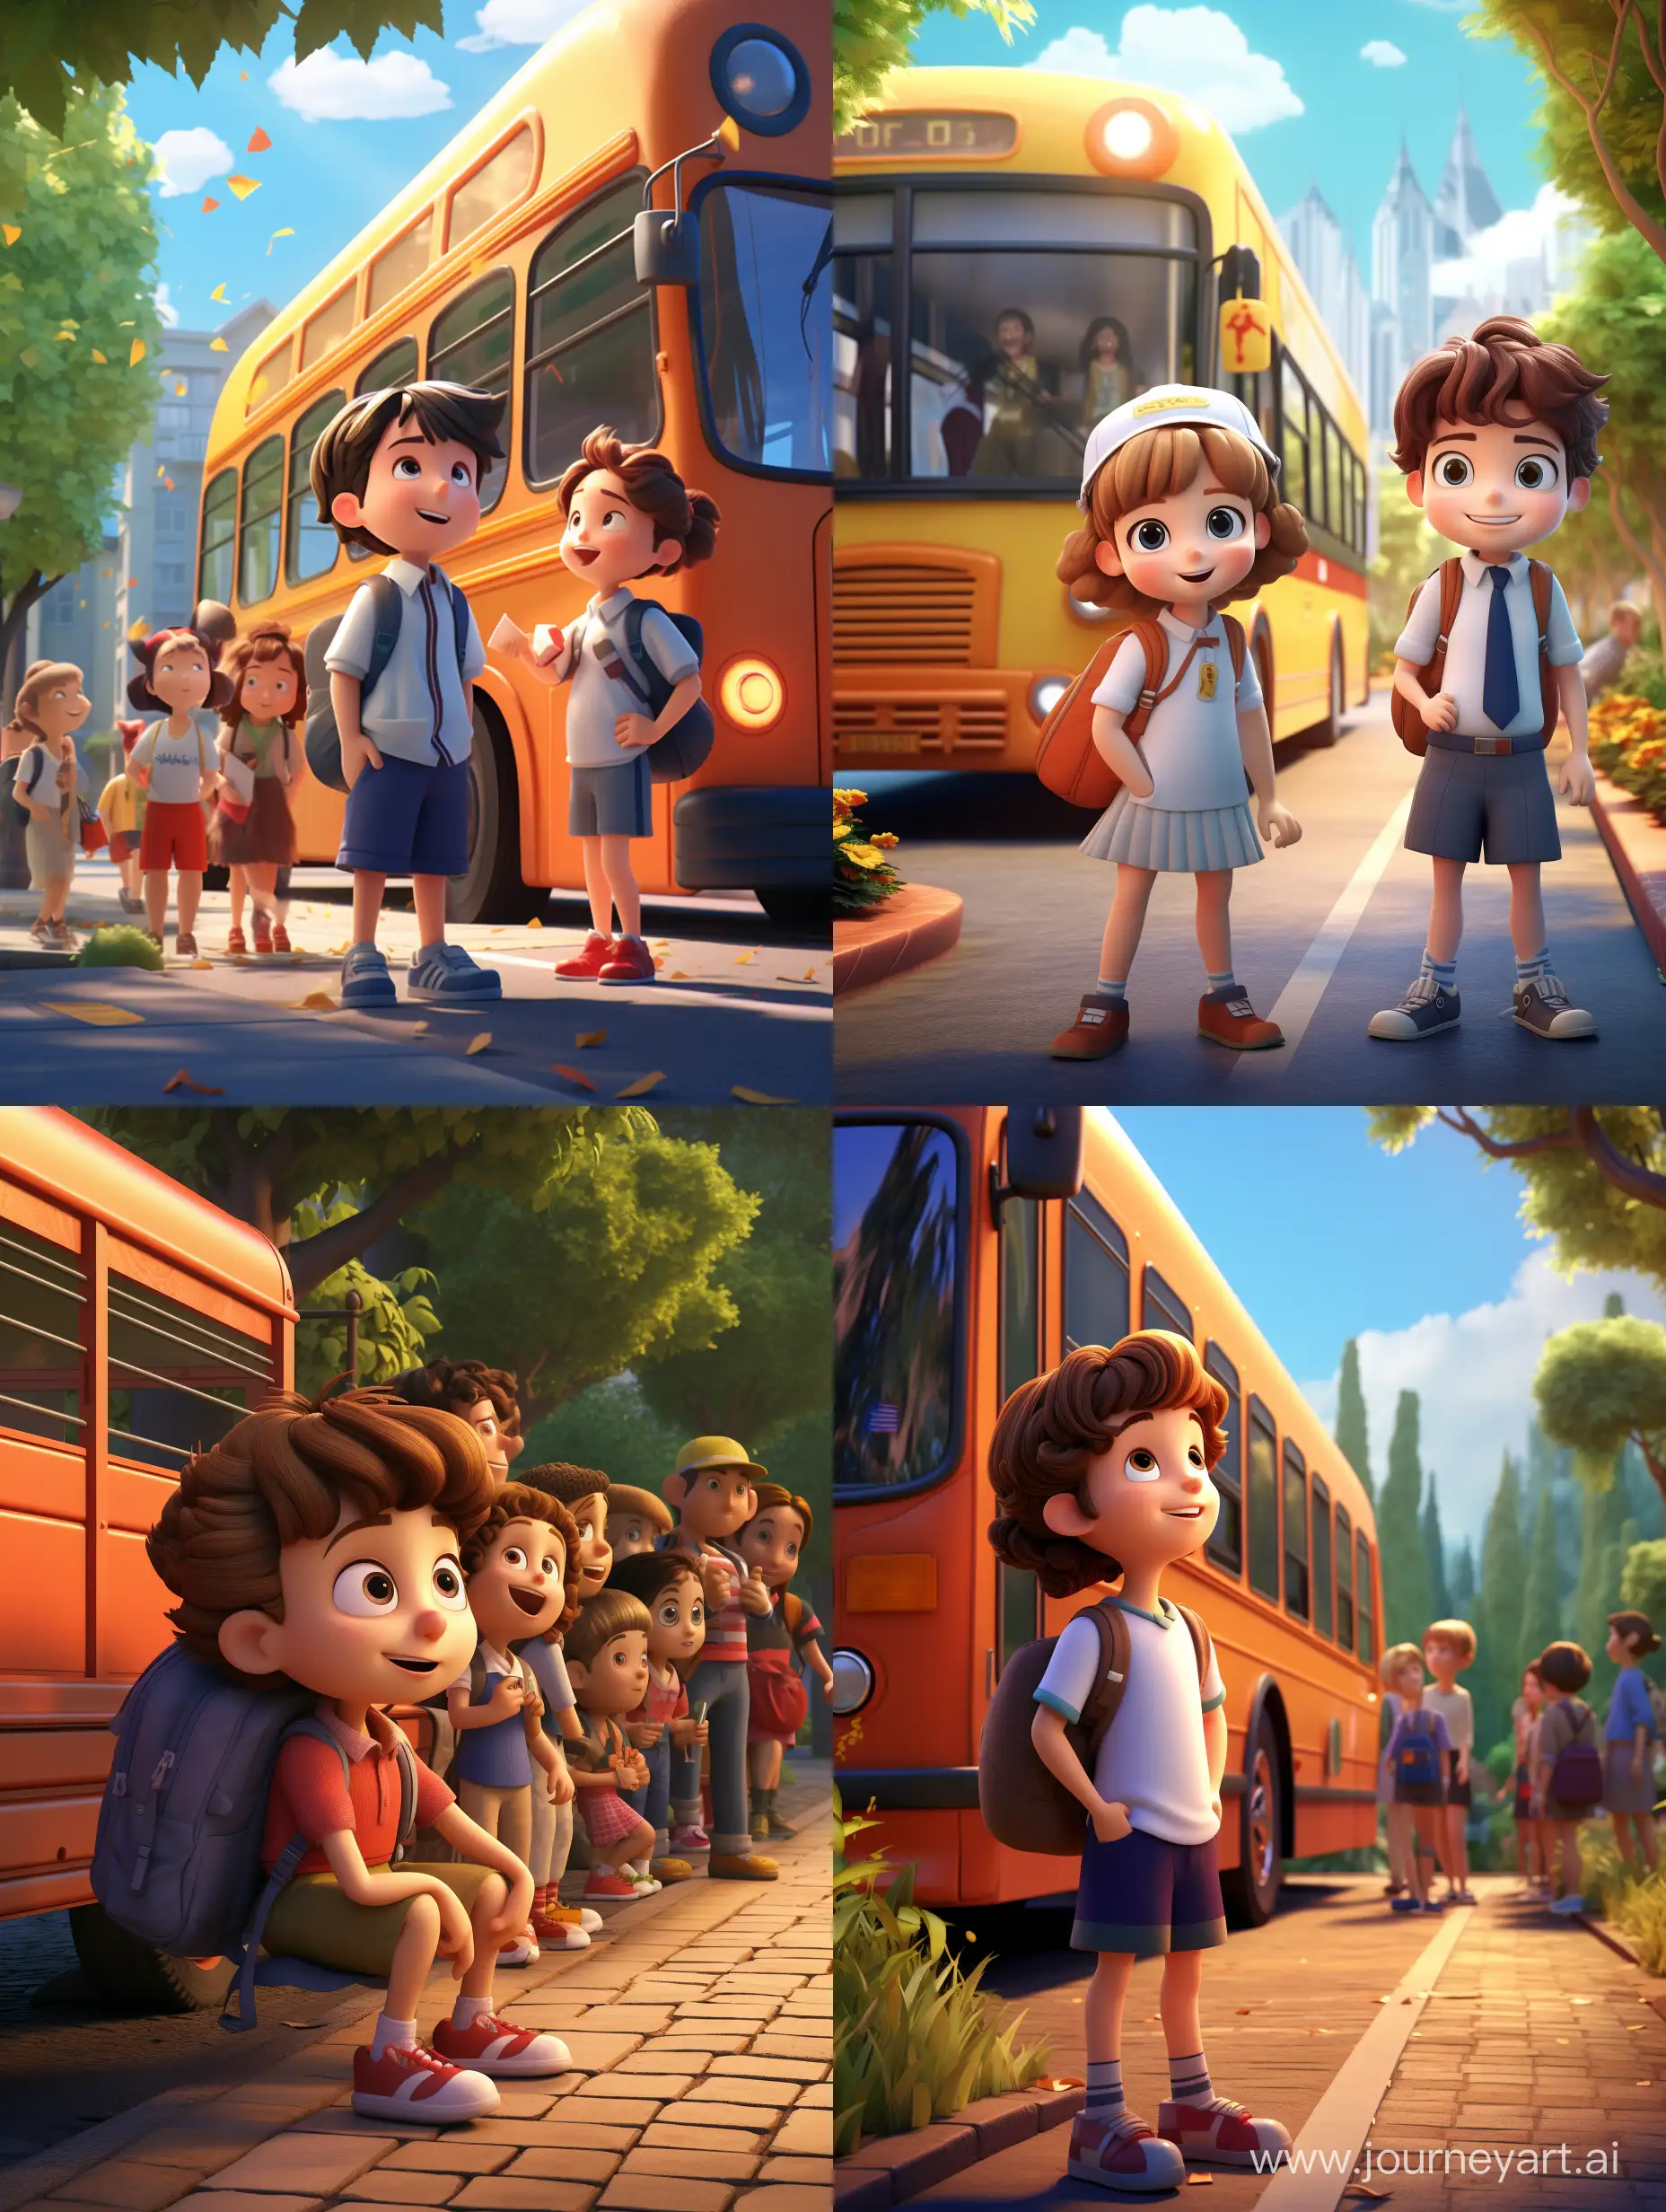 children and schoolchildren at the bus stop are waiting for the arriving school bus 3d animation style